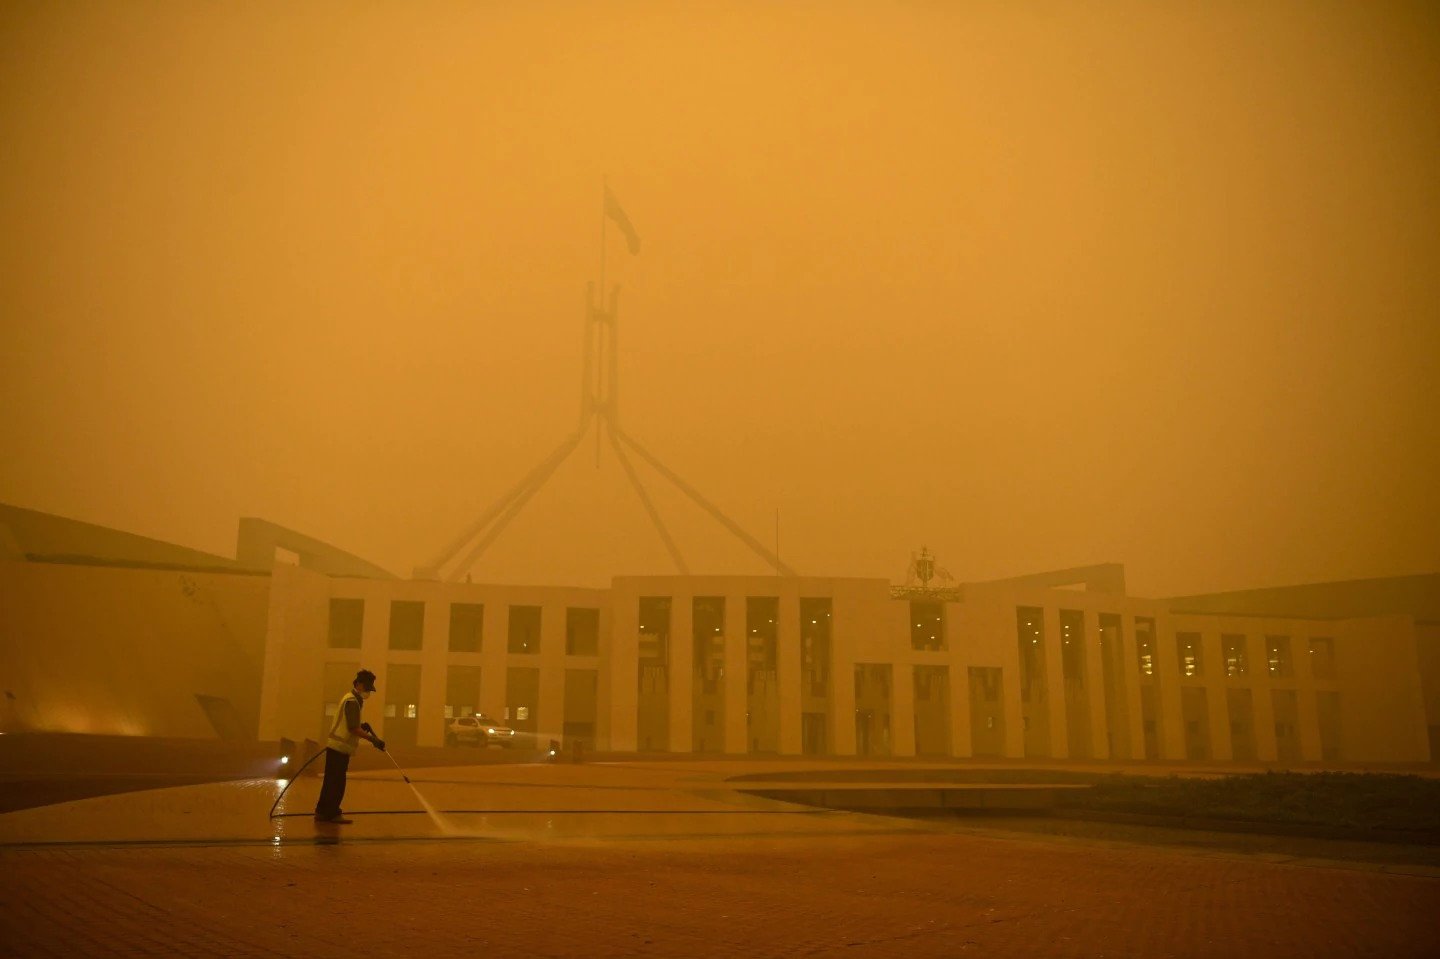 Amid an early-morning smoky haze, a man cleans the forecourt of Parliament House in Canberra, Australia, on Jan. 5. (Lukas Coch/Reuters)